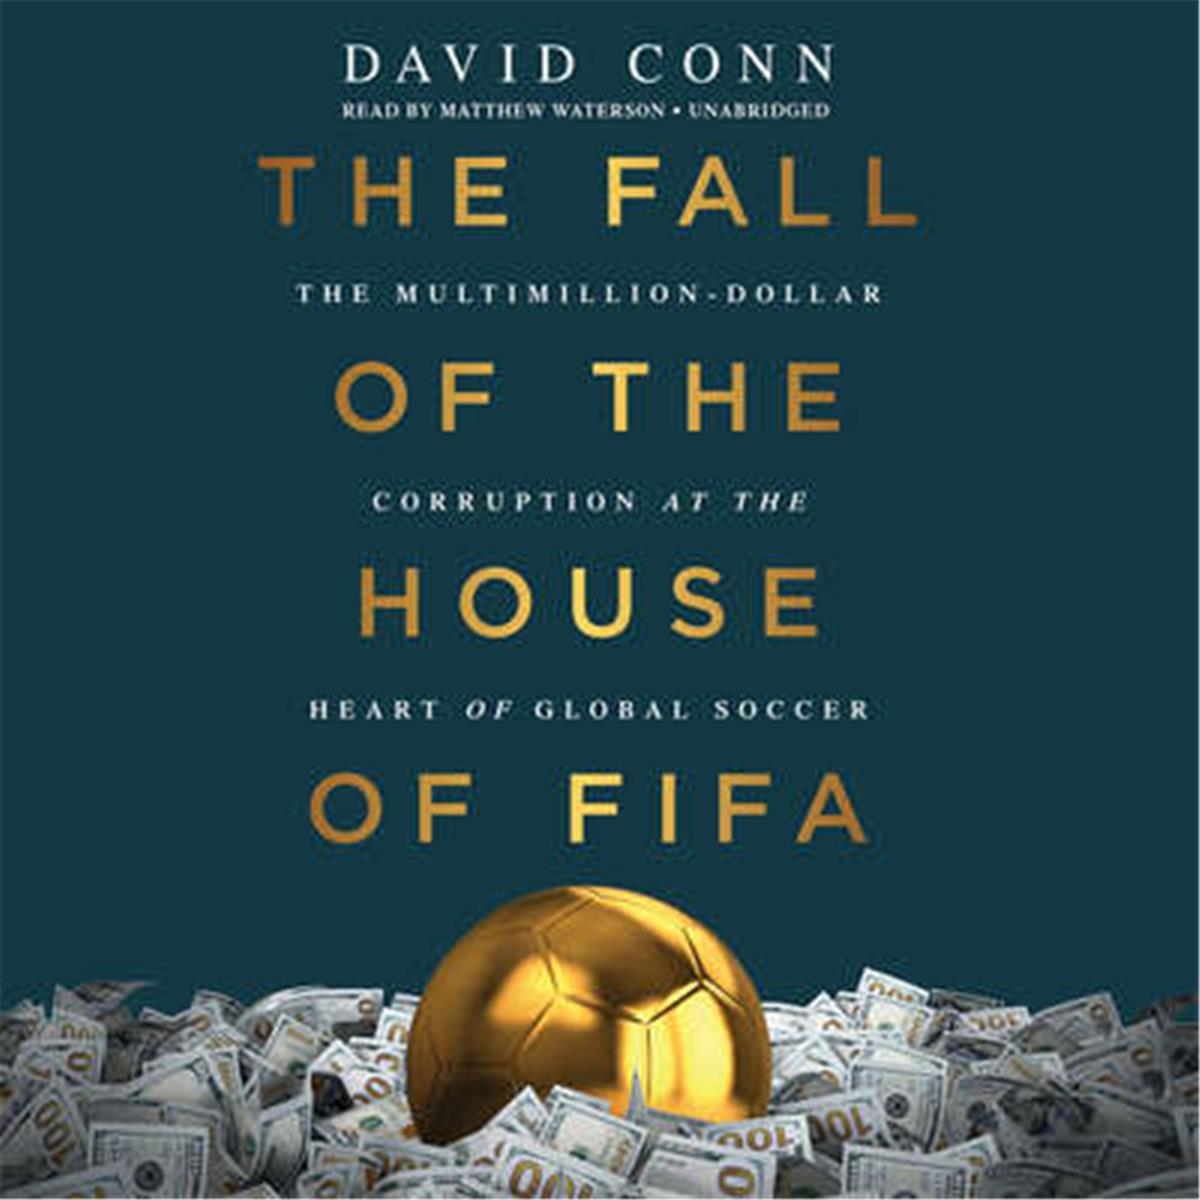 Picture of Blackstone Audio 9781478950127 The Fall of the House of FIFA Audio Book